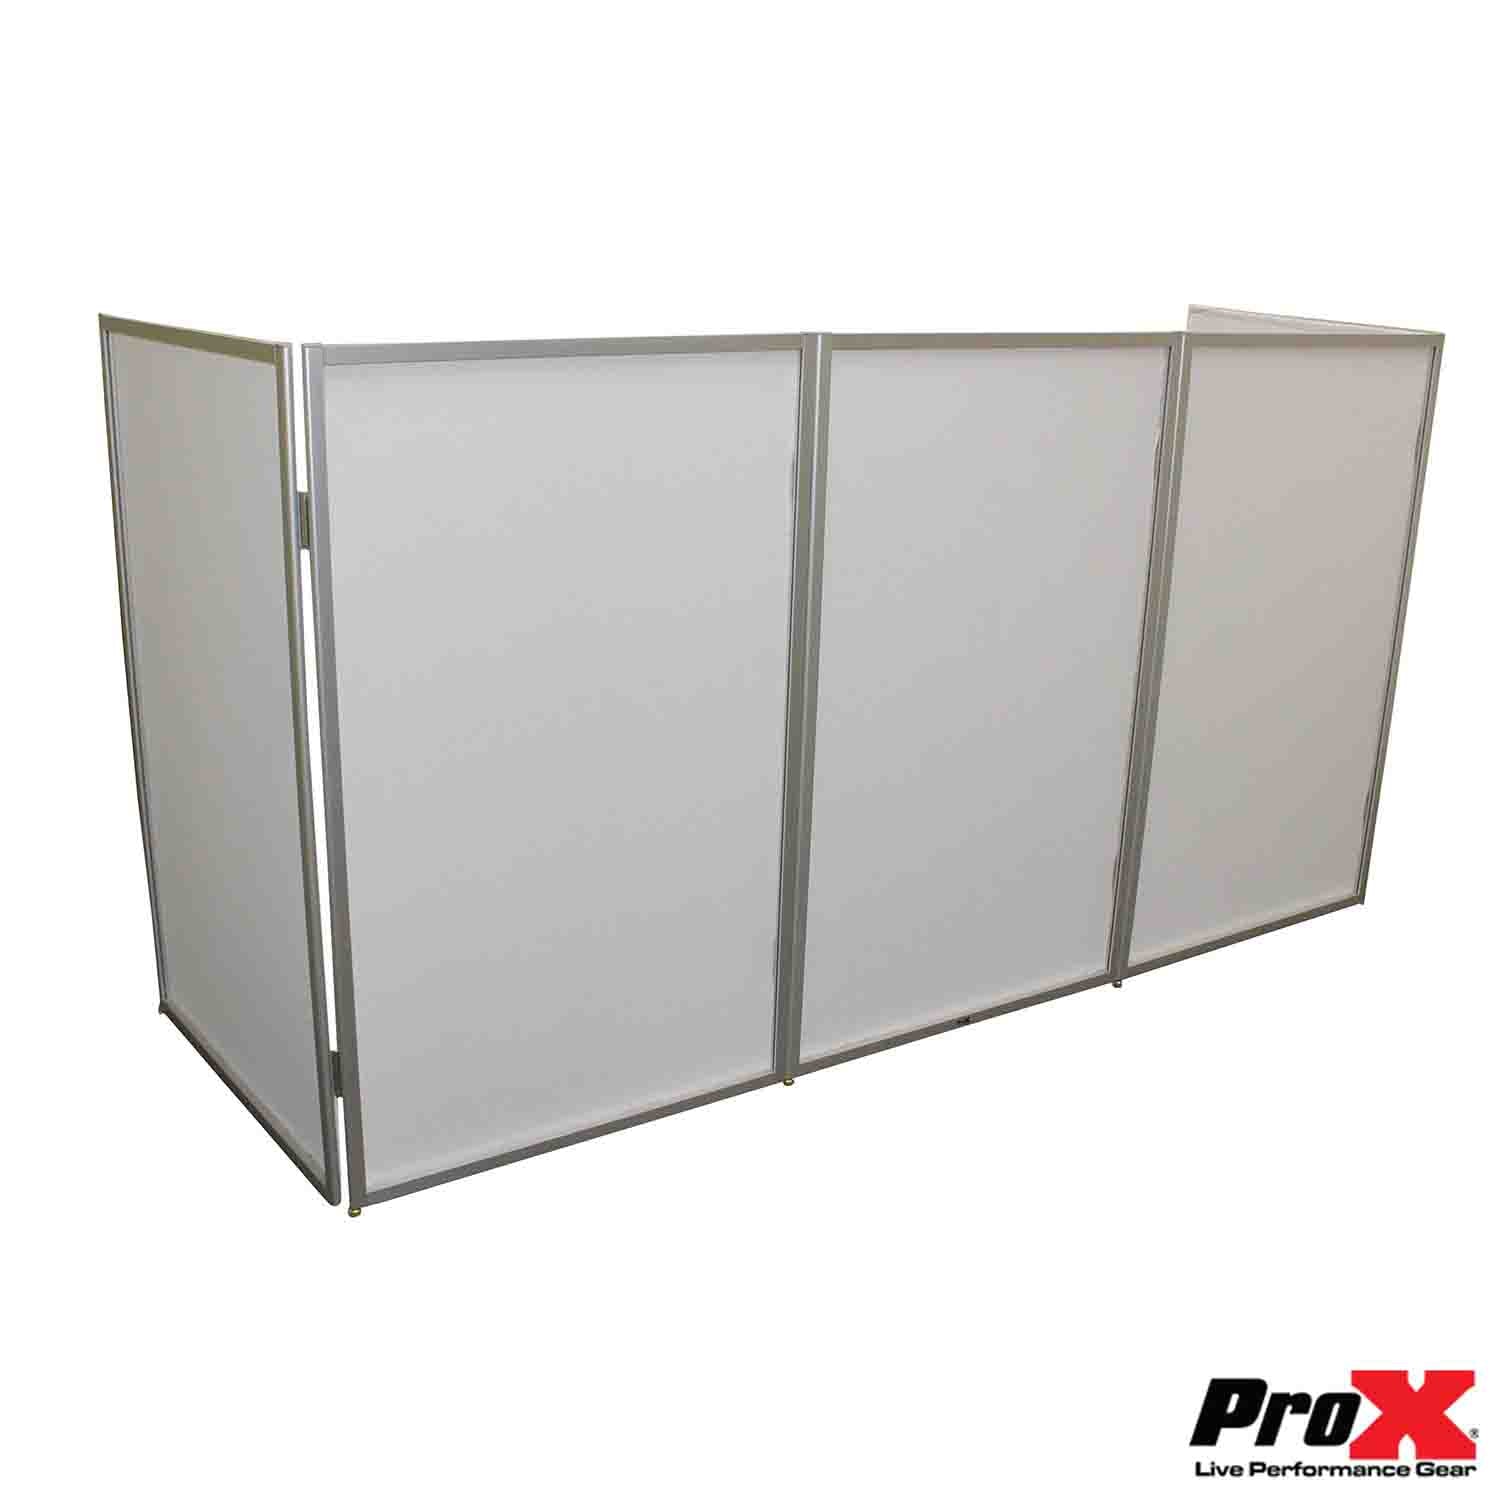 ProX XF-5X3048 Five Panel Frame DJ Facade with Stainless Quick Release 180° Hinges by ProX Cases